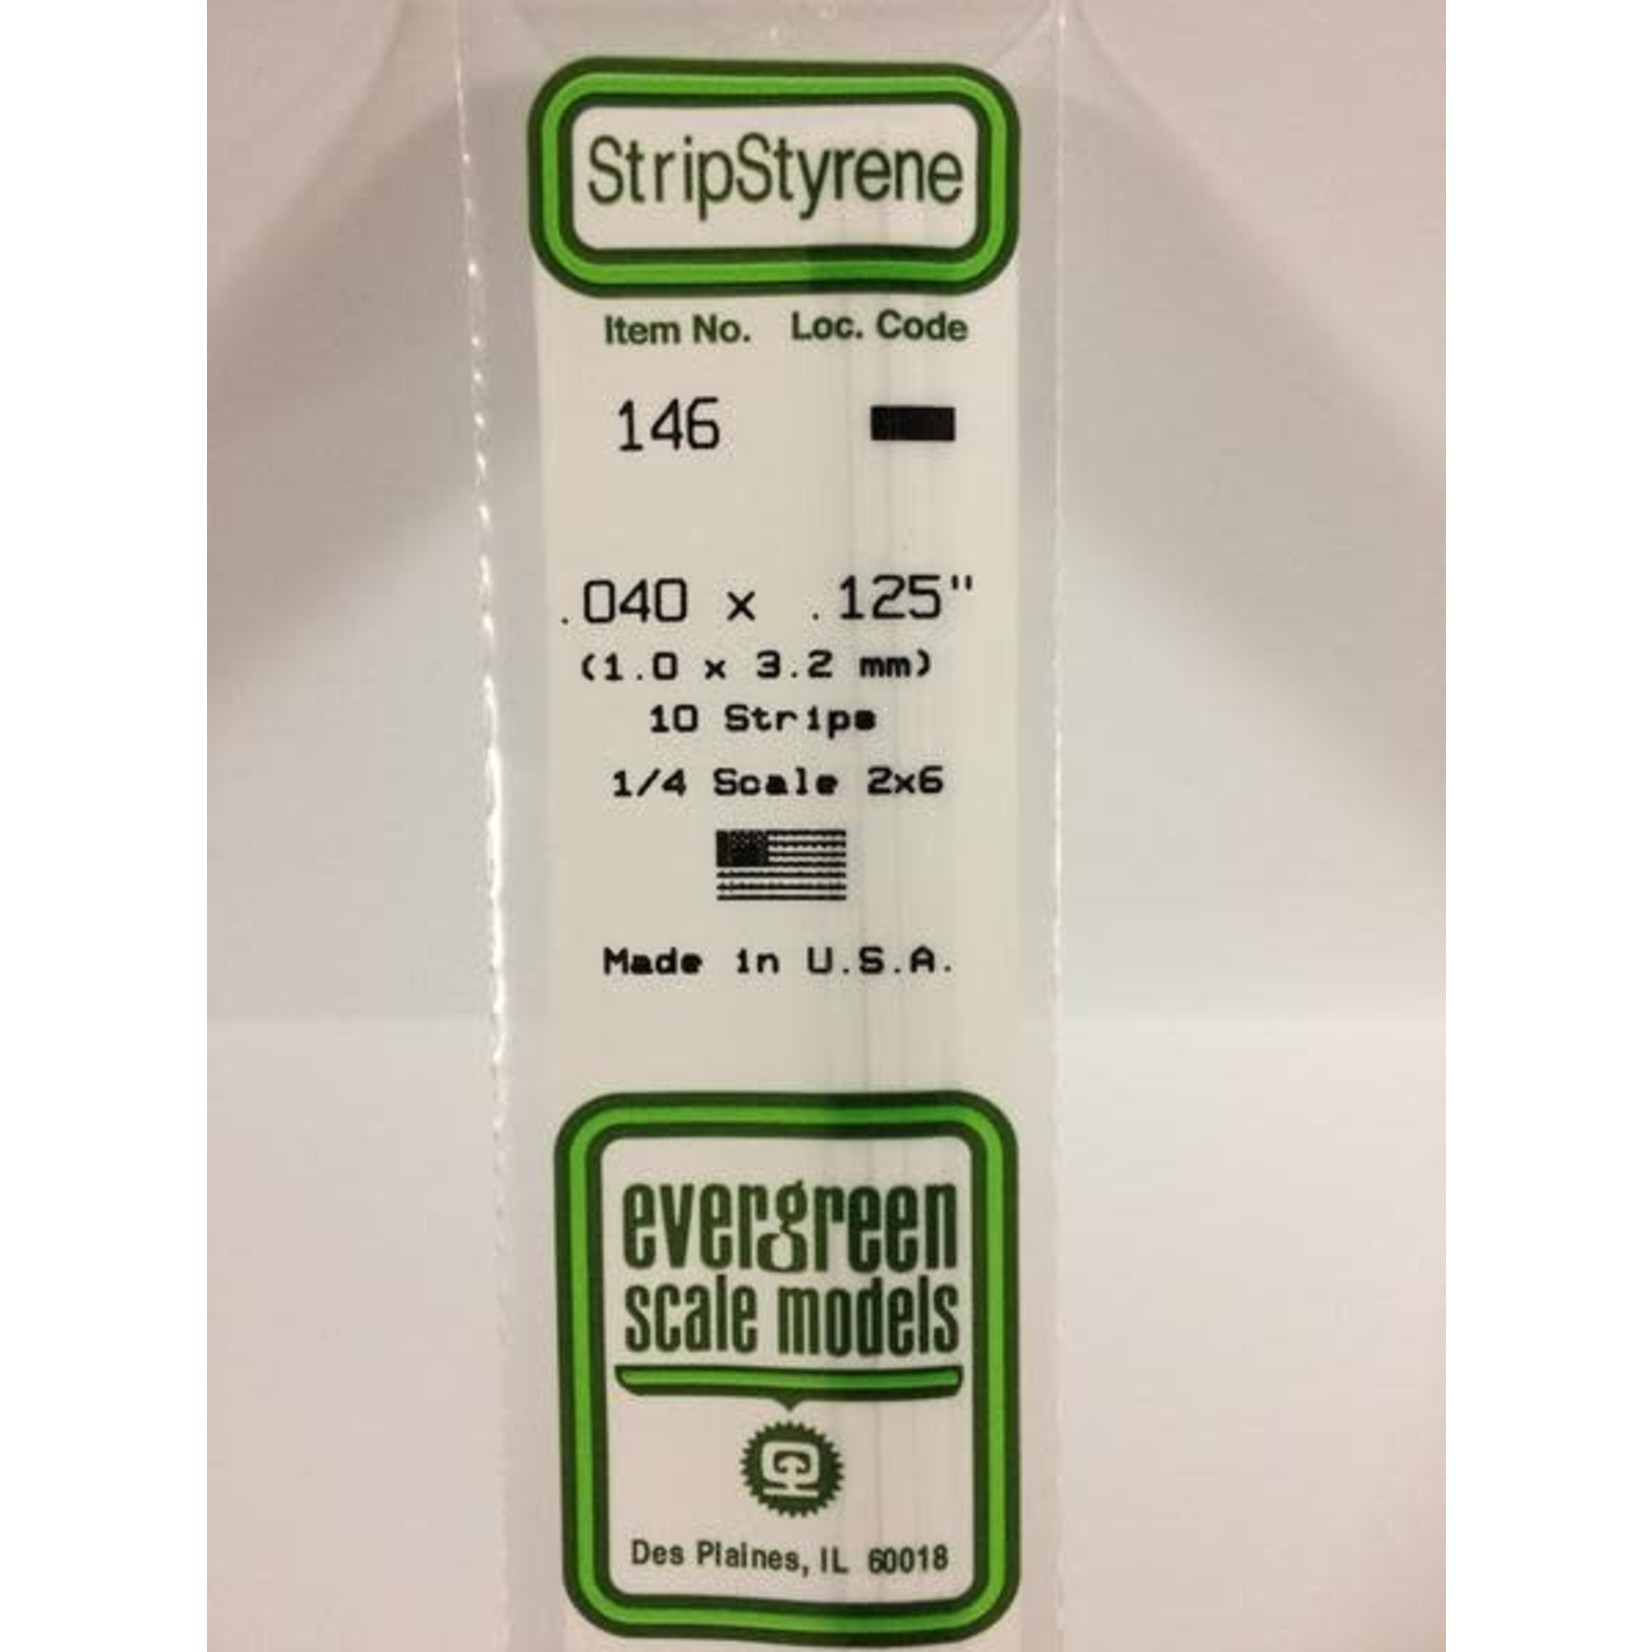 Evergreen Scale Models Evergreen 146 - .040" X .125" OPAQUE WHITE POLYSTYRENE STRIP